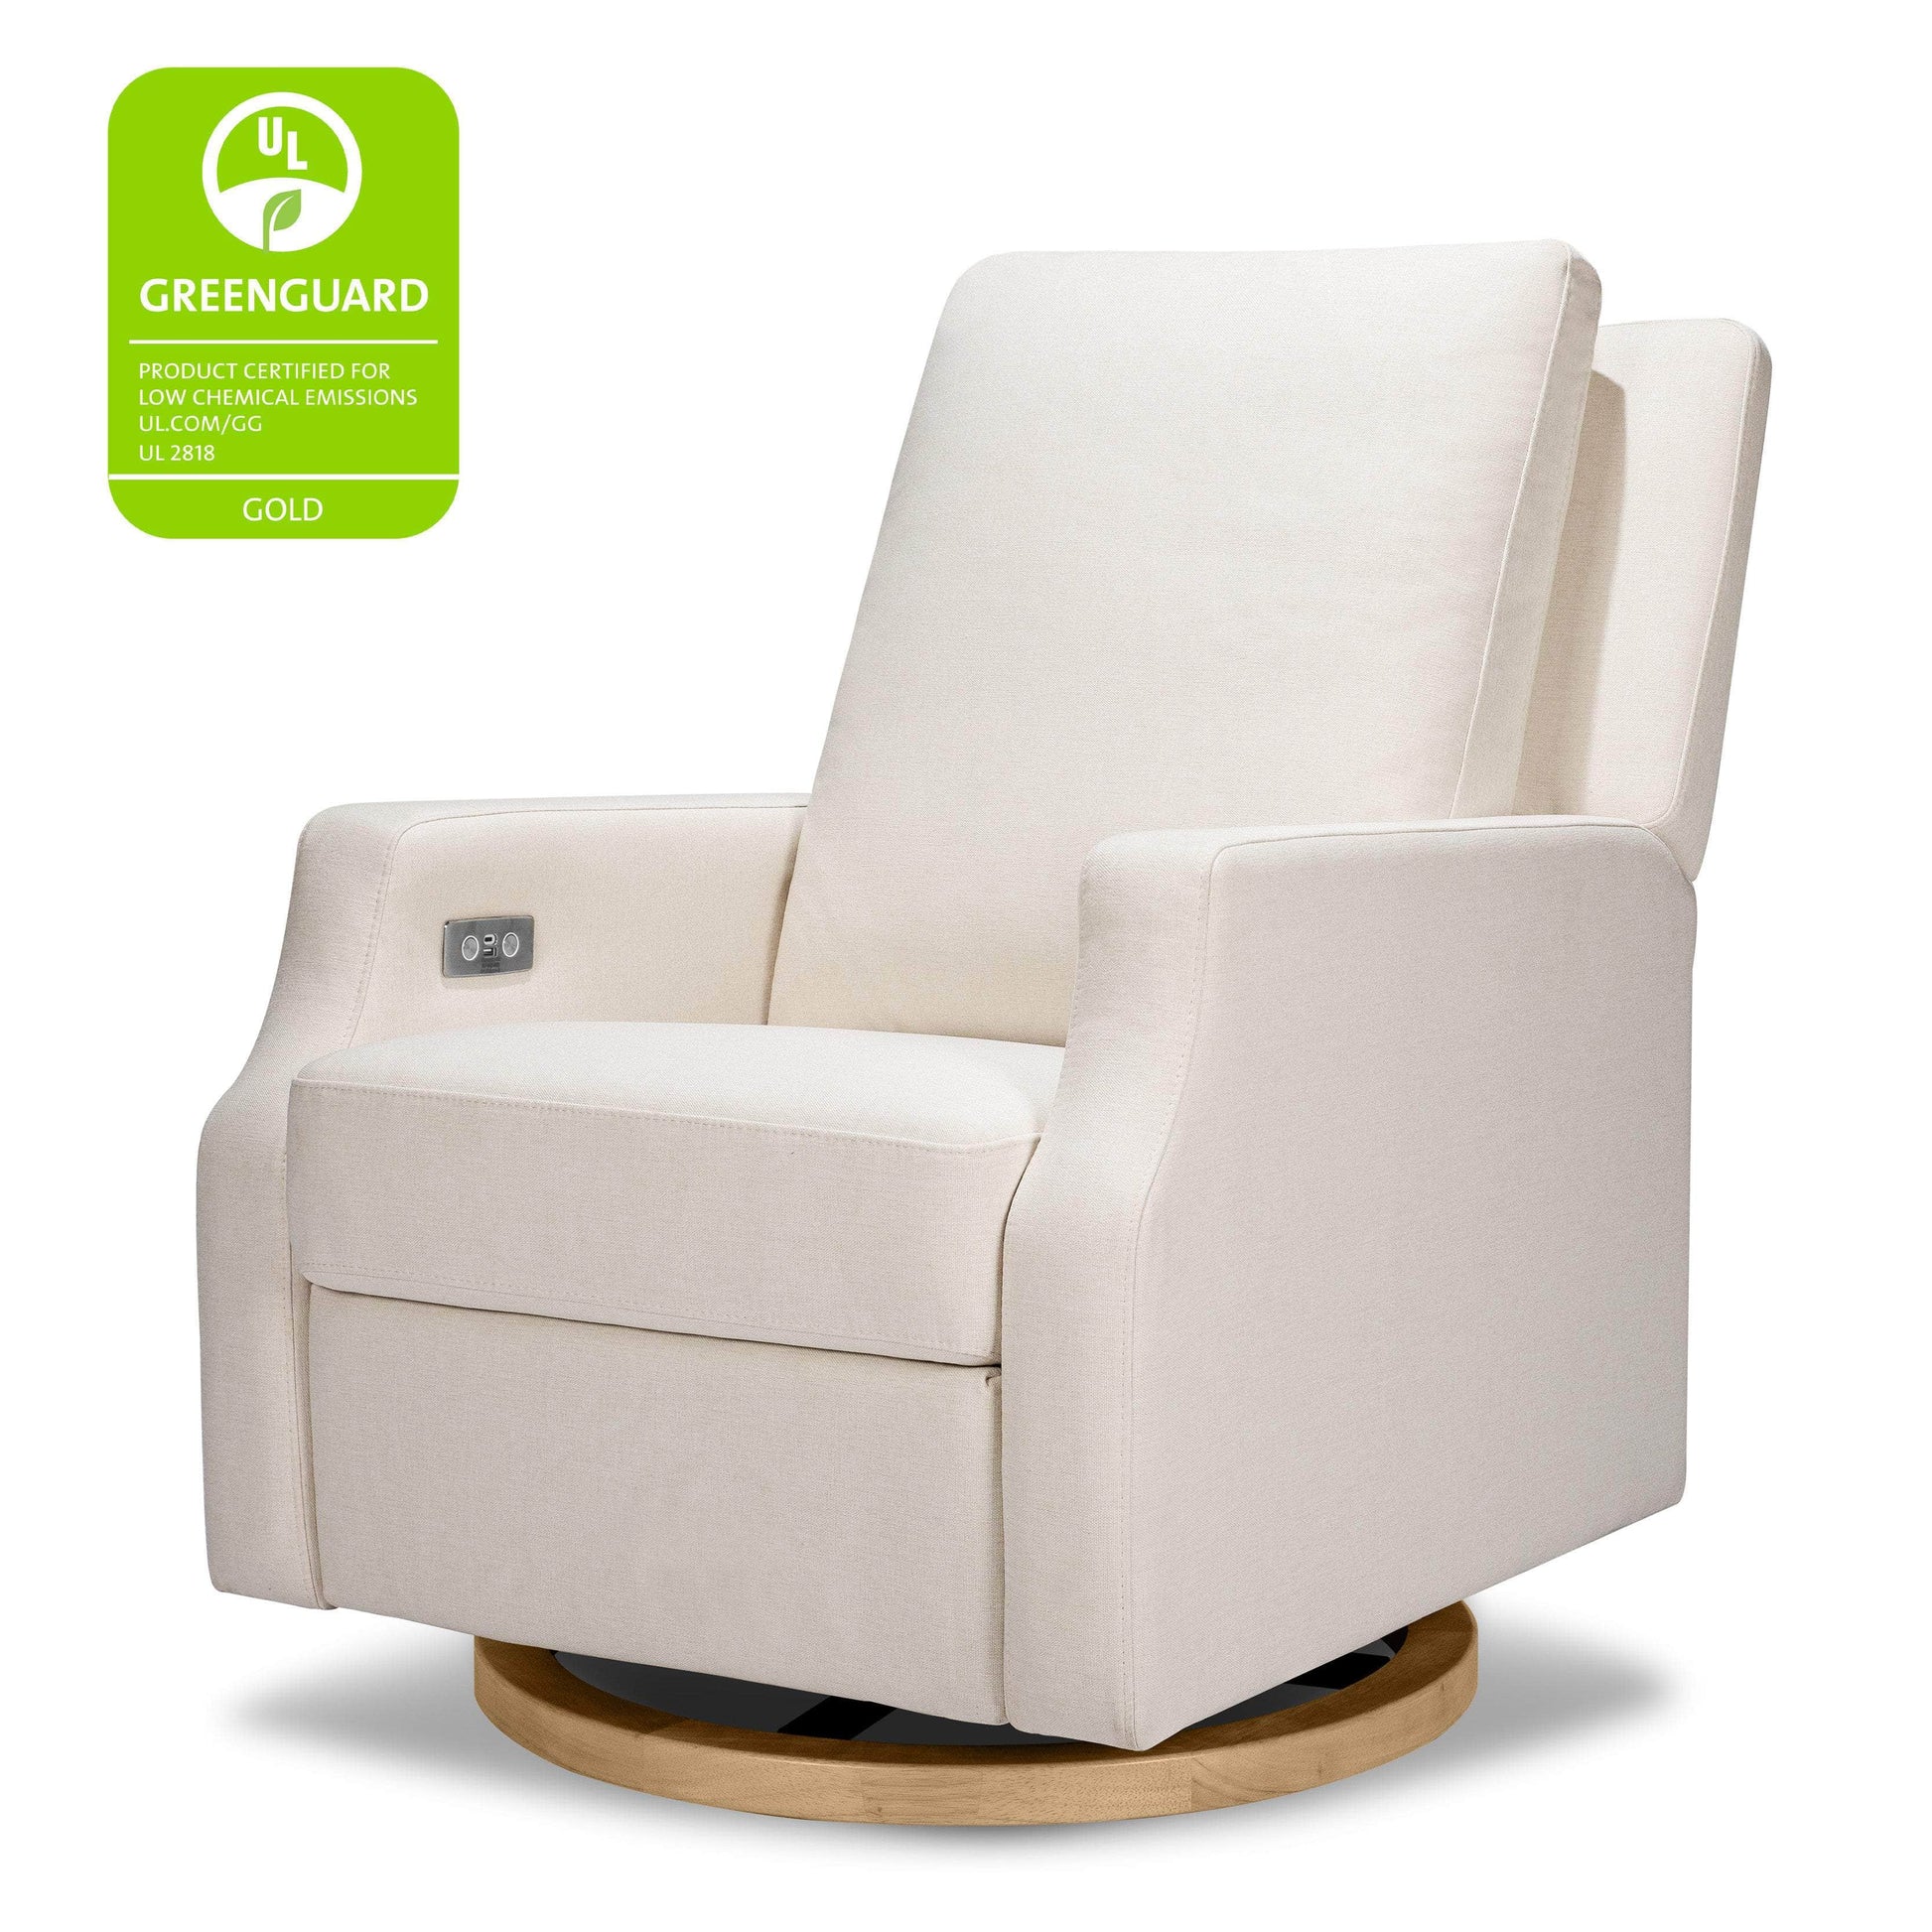 M22286PCMEWLB,Crewe Electronic Swivel Glider Recliner in Performance Cream Eco-Weave w/Light Wood Base